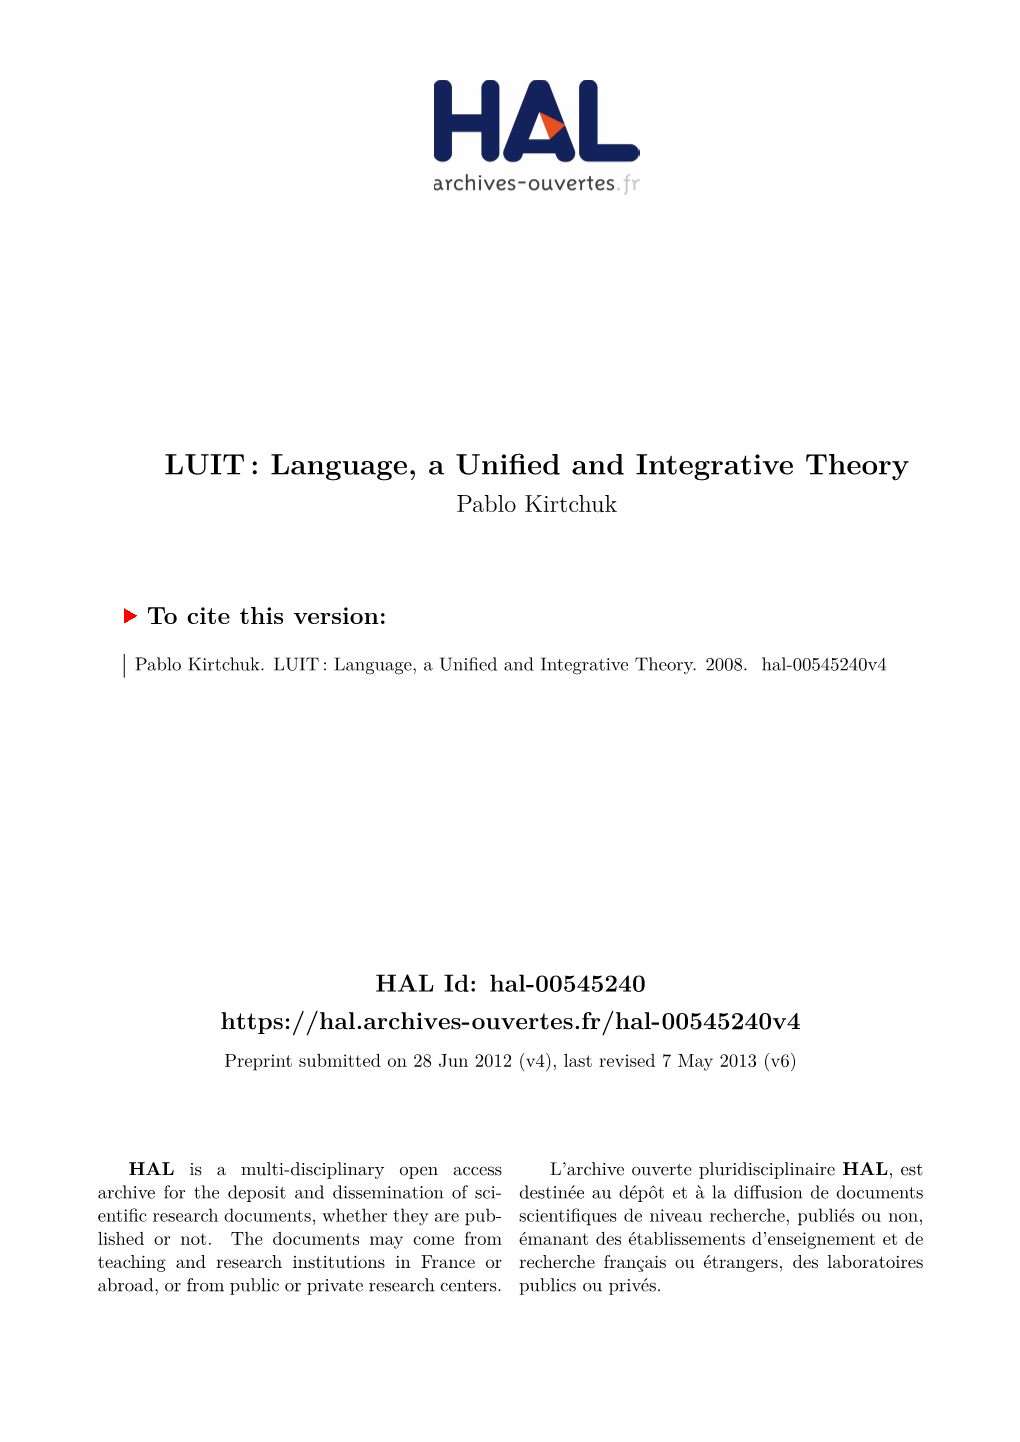 LUIT: Language, a Unified and Integrative Theory (1St Part, June 2012 Version)